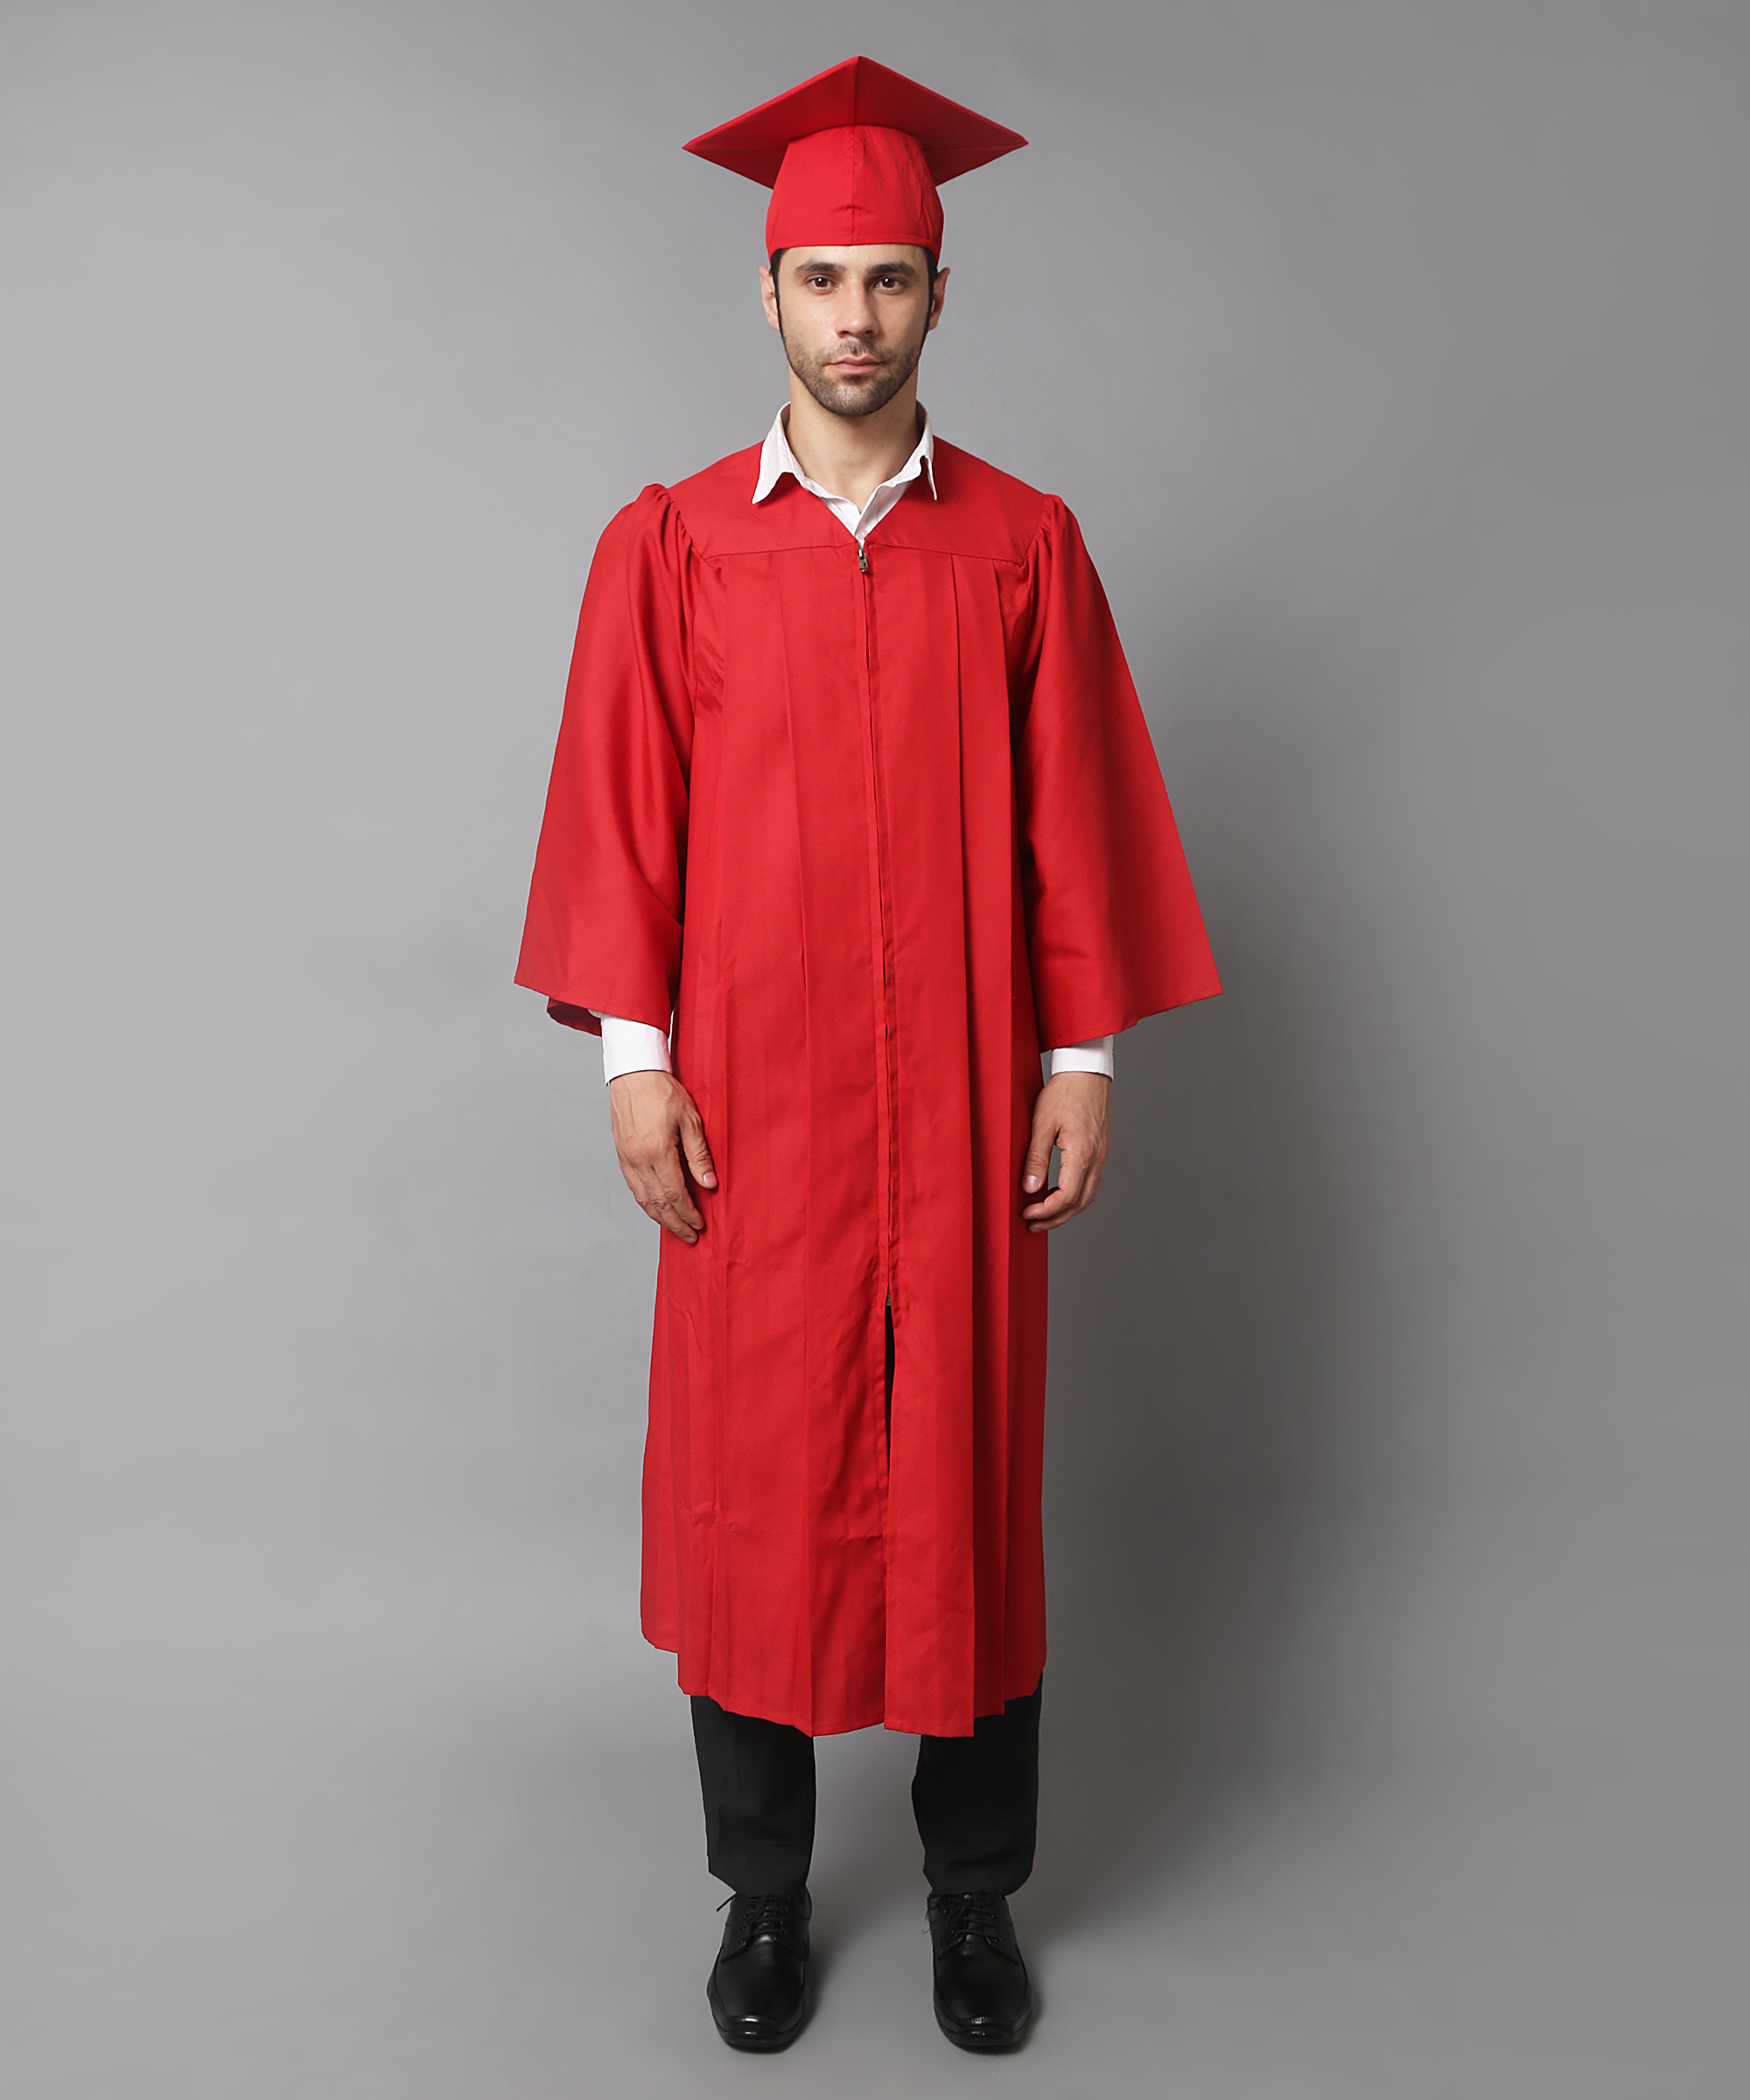 Costume Adults graduation gowns/robes All Age (36, RED) : Amazon.in: Toys &  Games